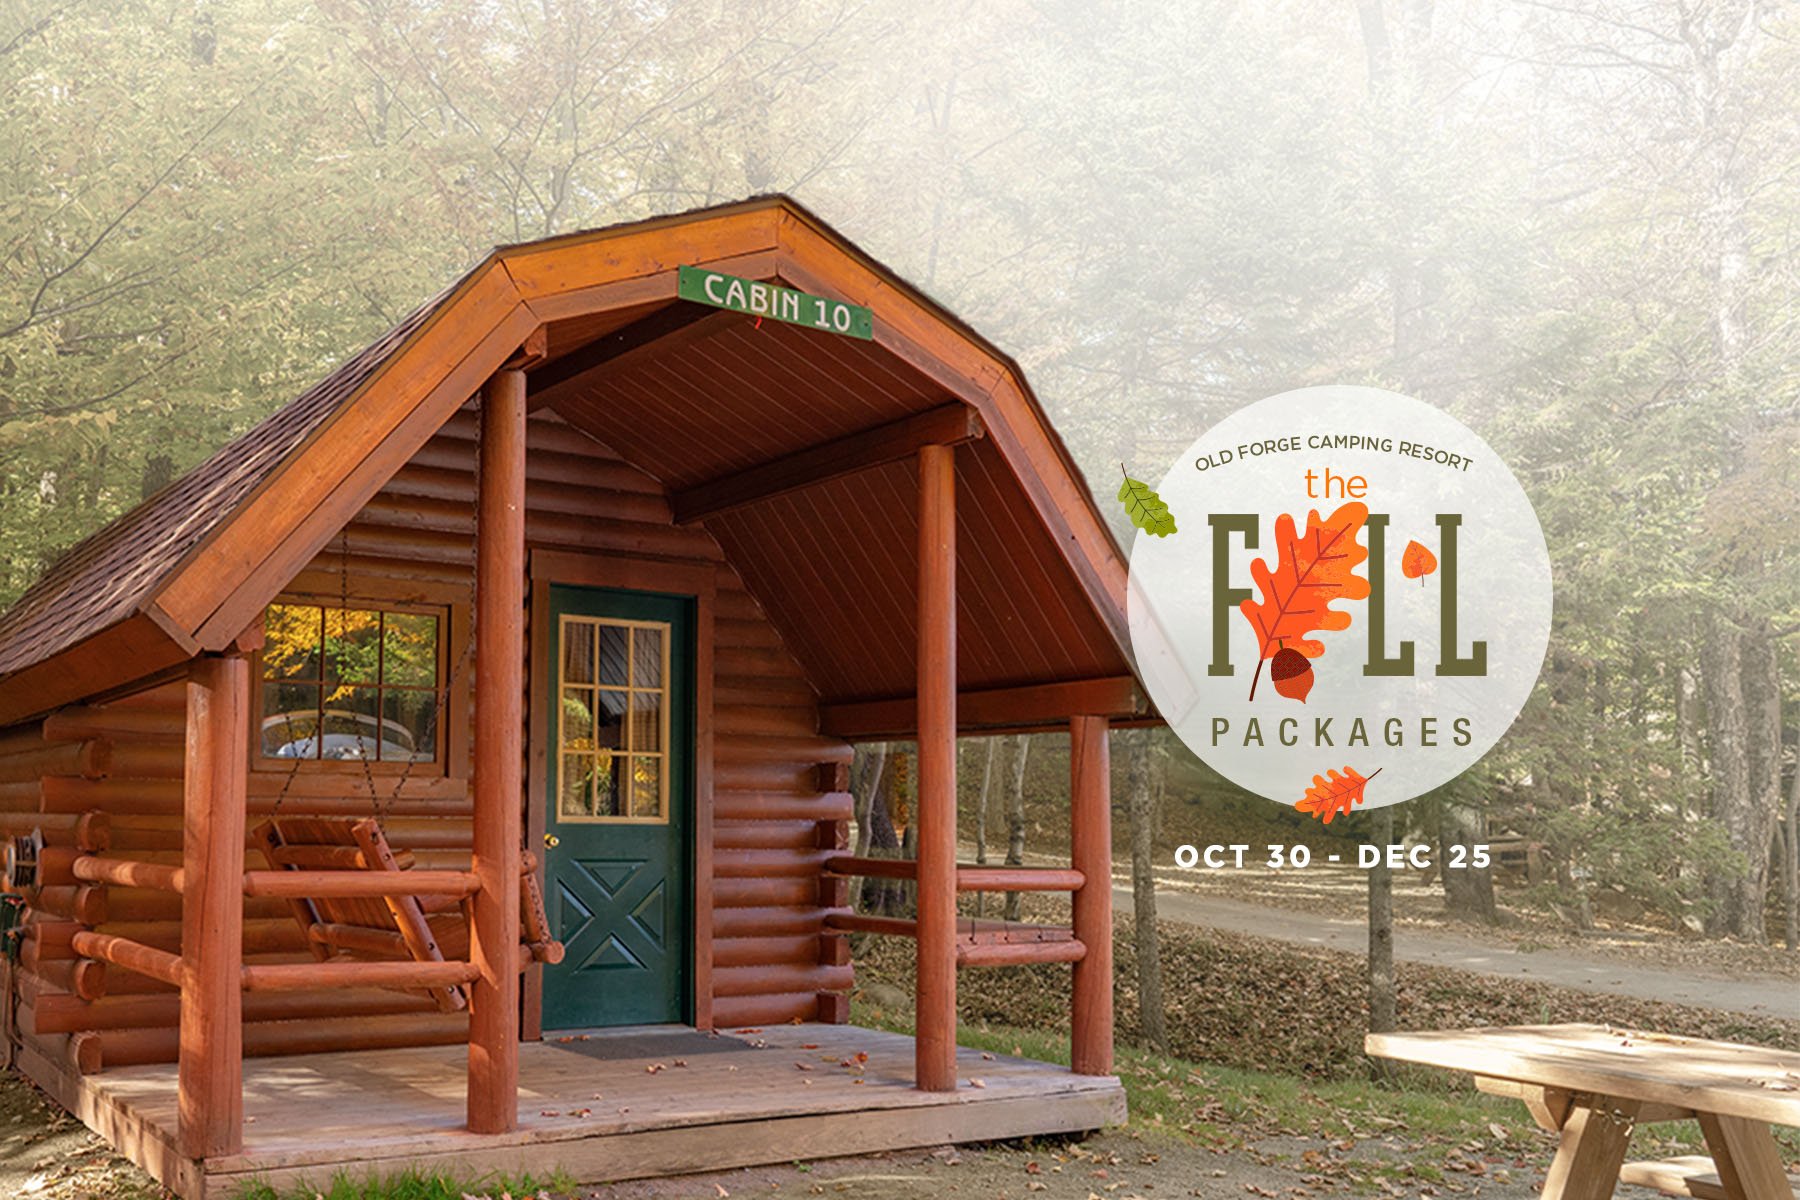 Fall Packages